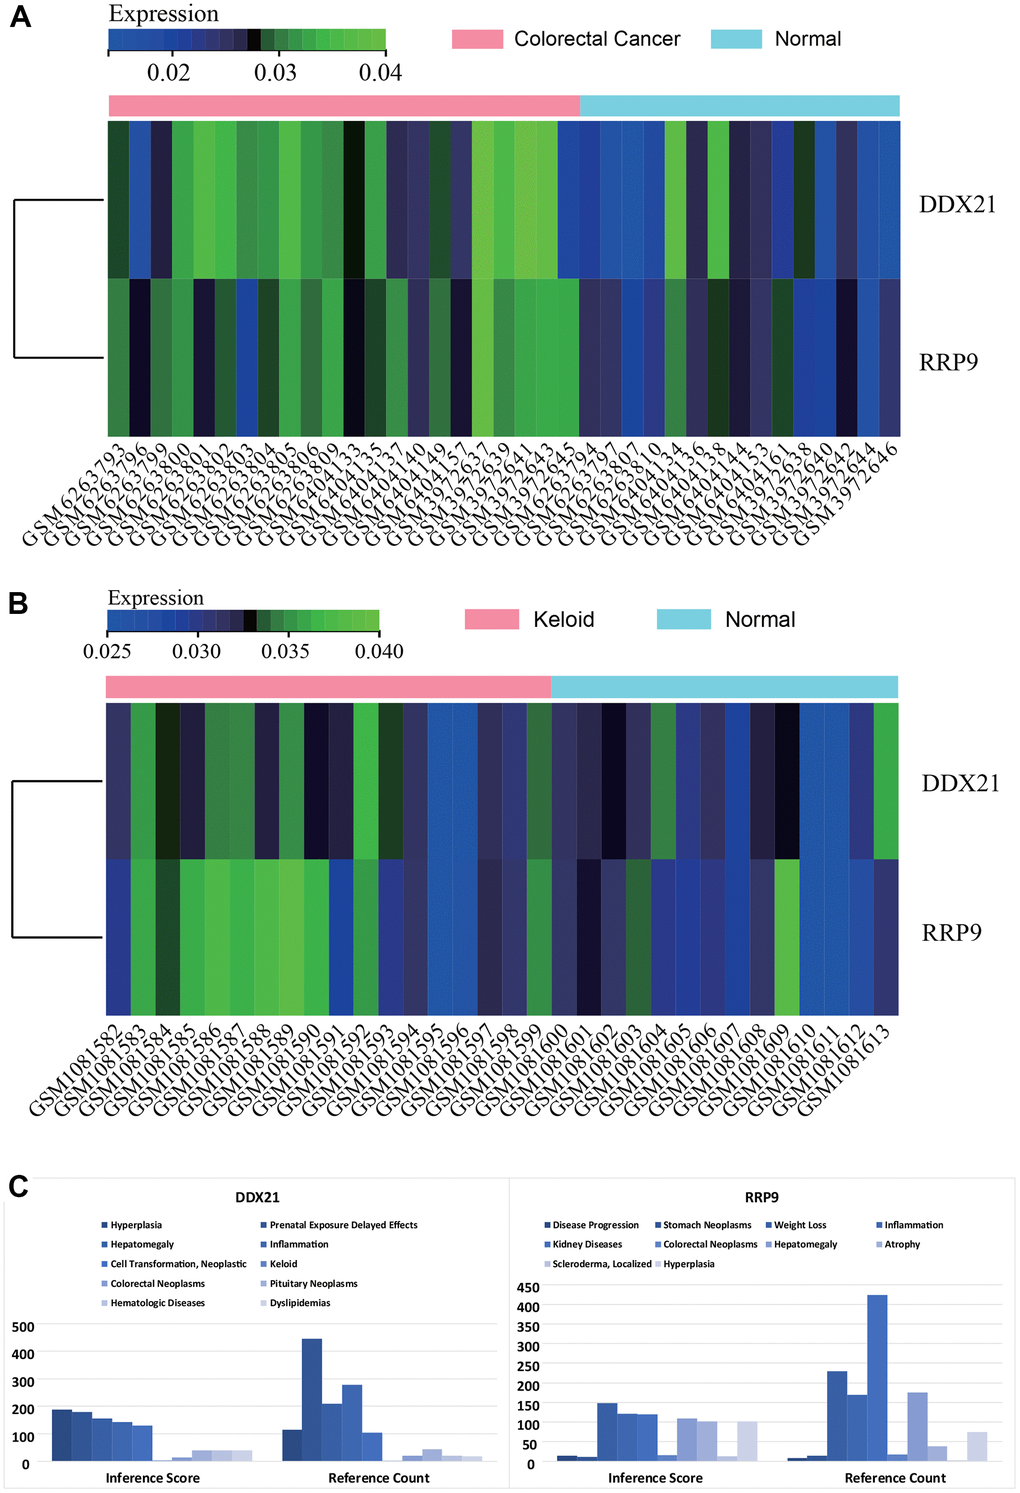 Gene expression heat map. (A) colorectal cancer. (B) keloids. (C) CTD analysis, Core genes (RRP9, DDX21) were found to be associated with hyperplasia, keloid, colorectal tumor, scleroderma, and inflammation.